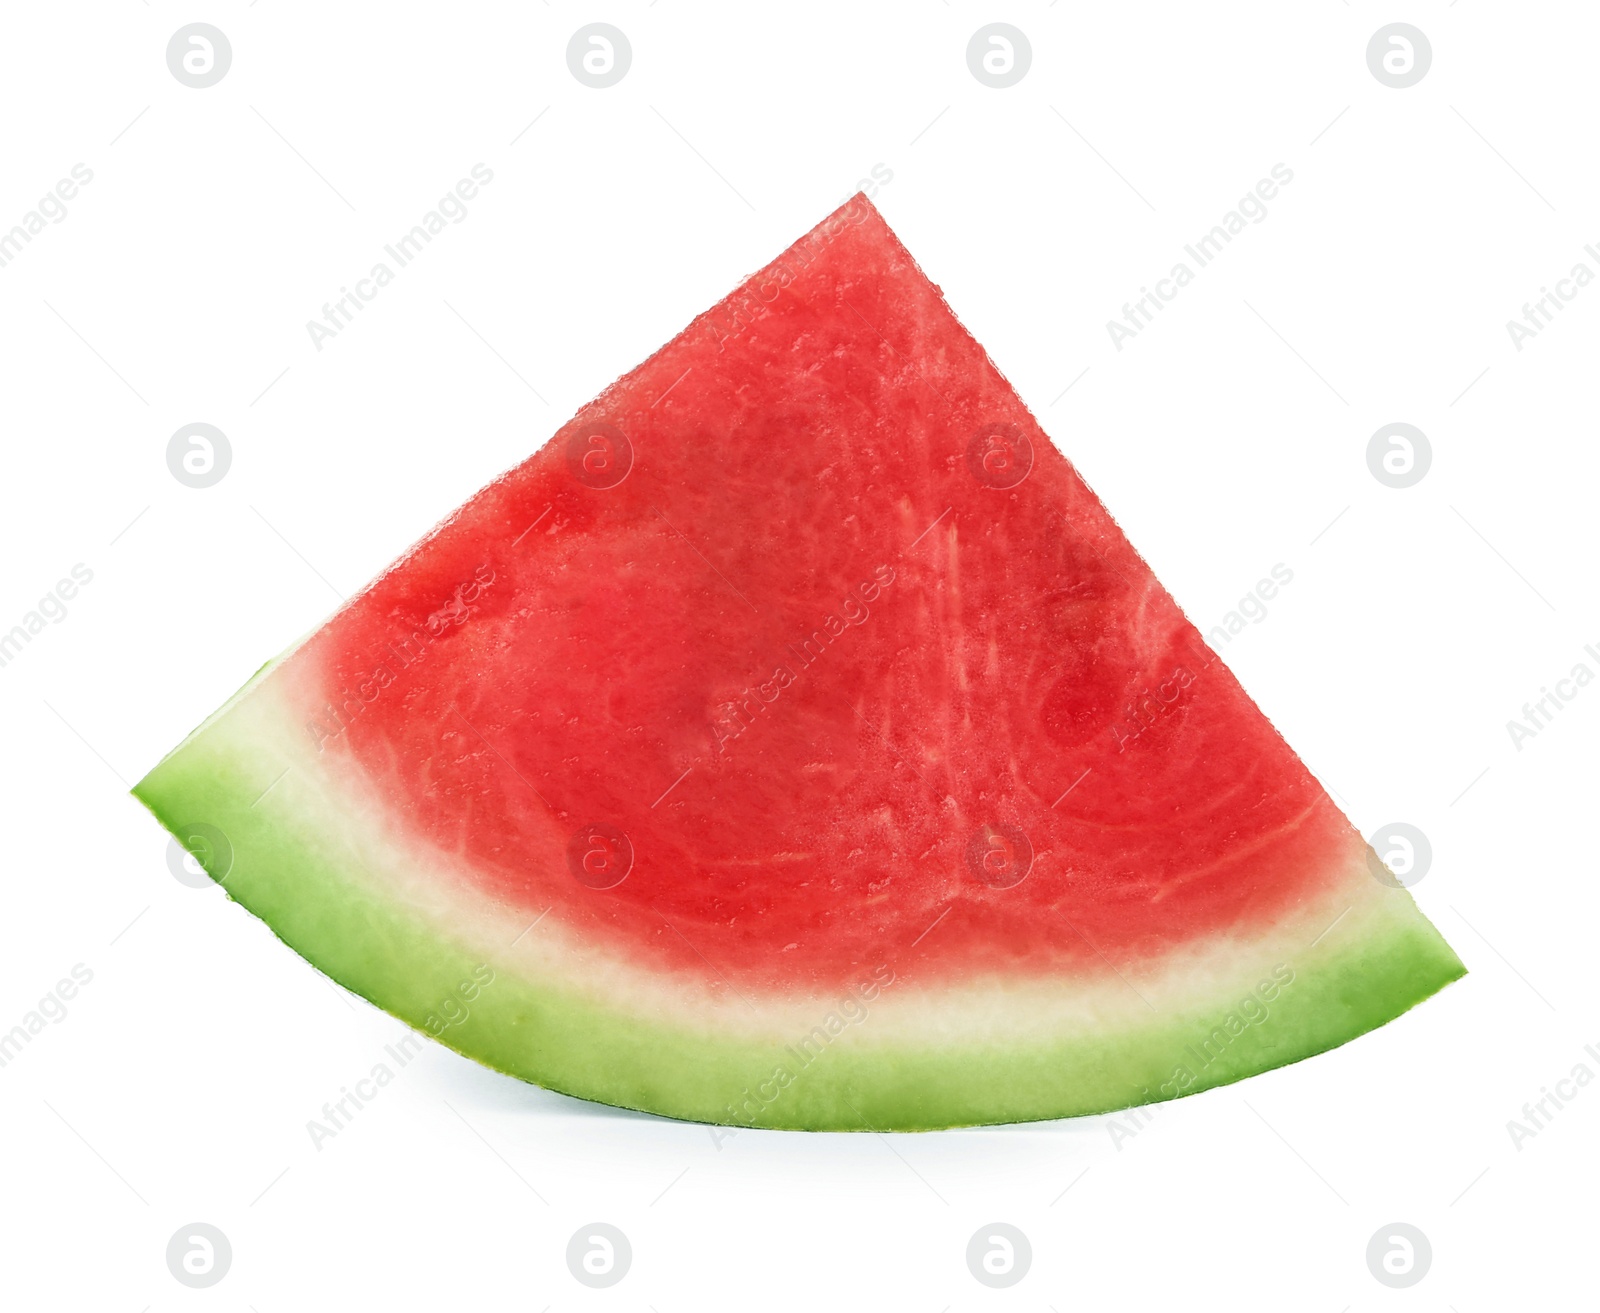 Image of Slice of delicious ripe seedless watermelon isolated on white